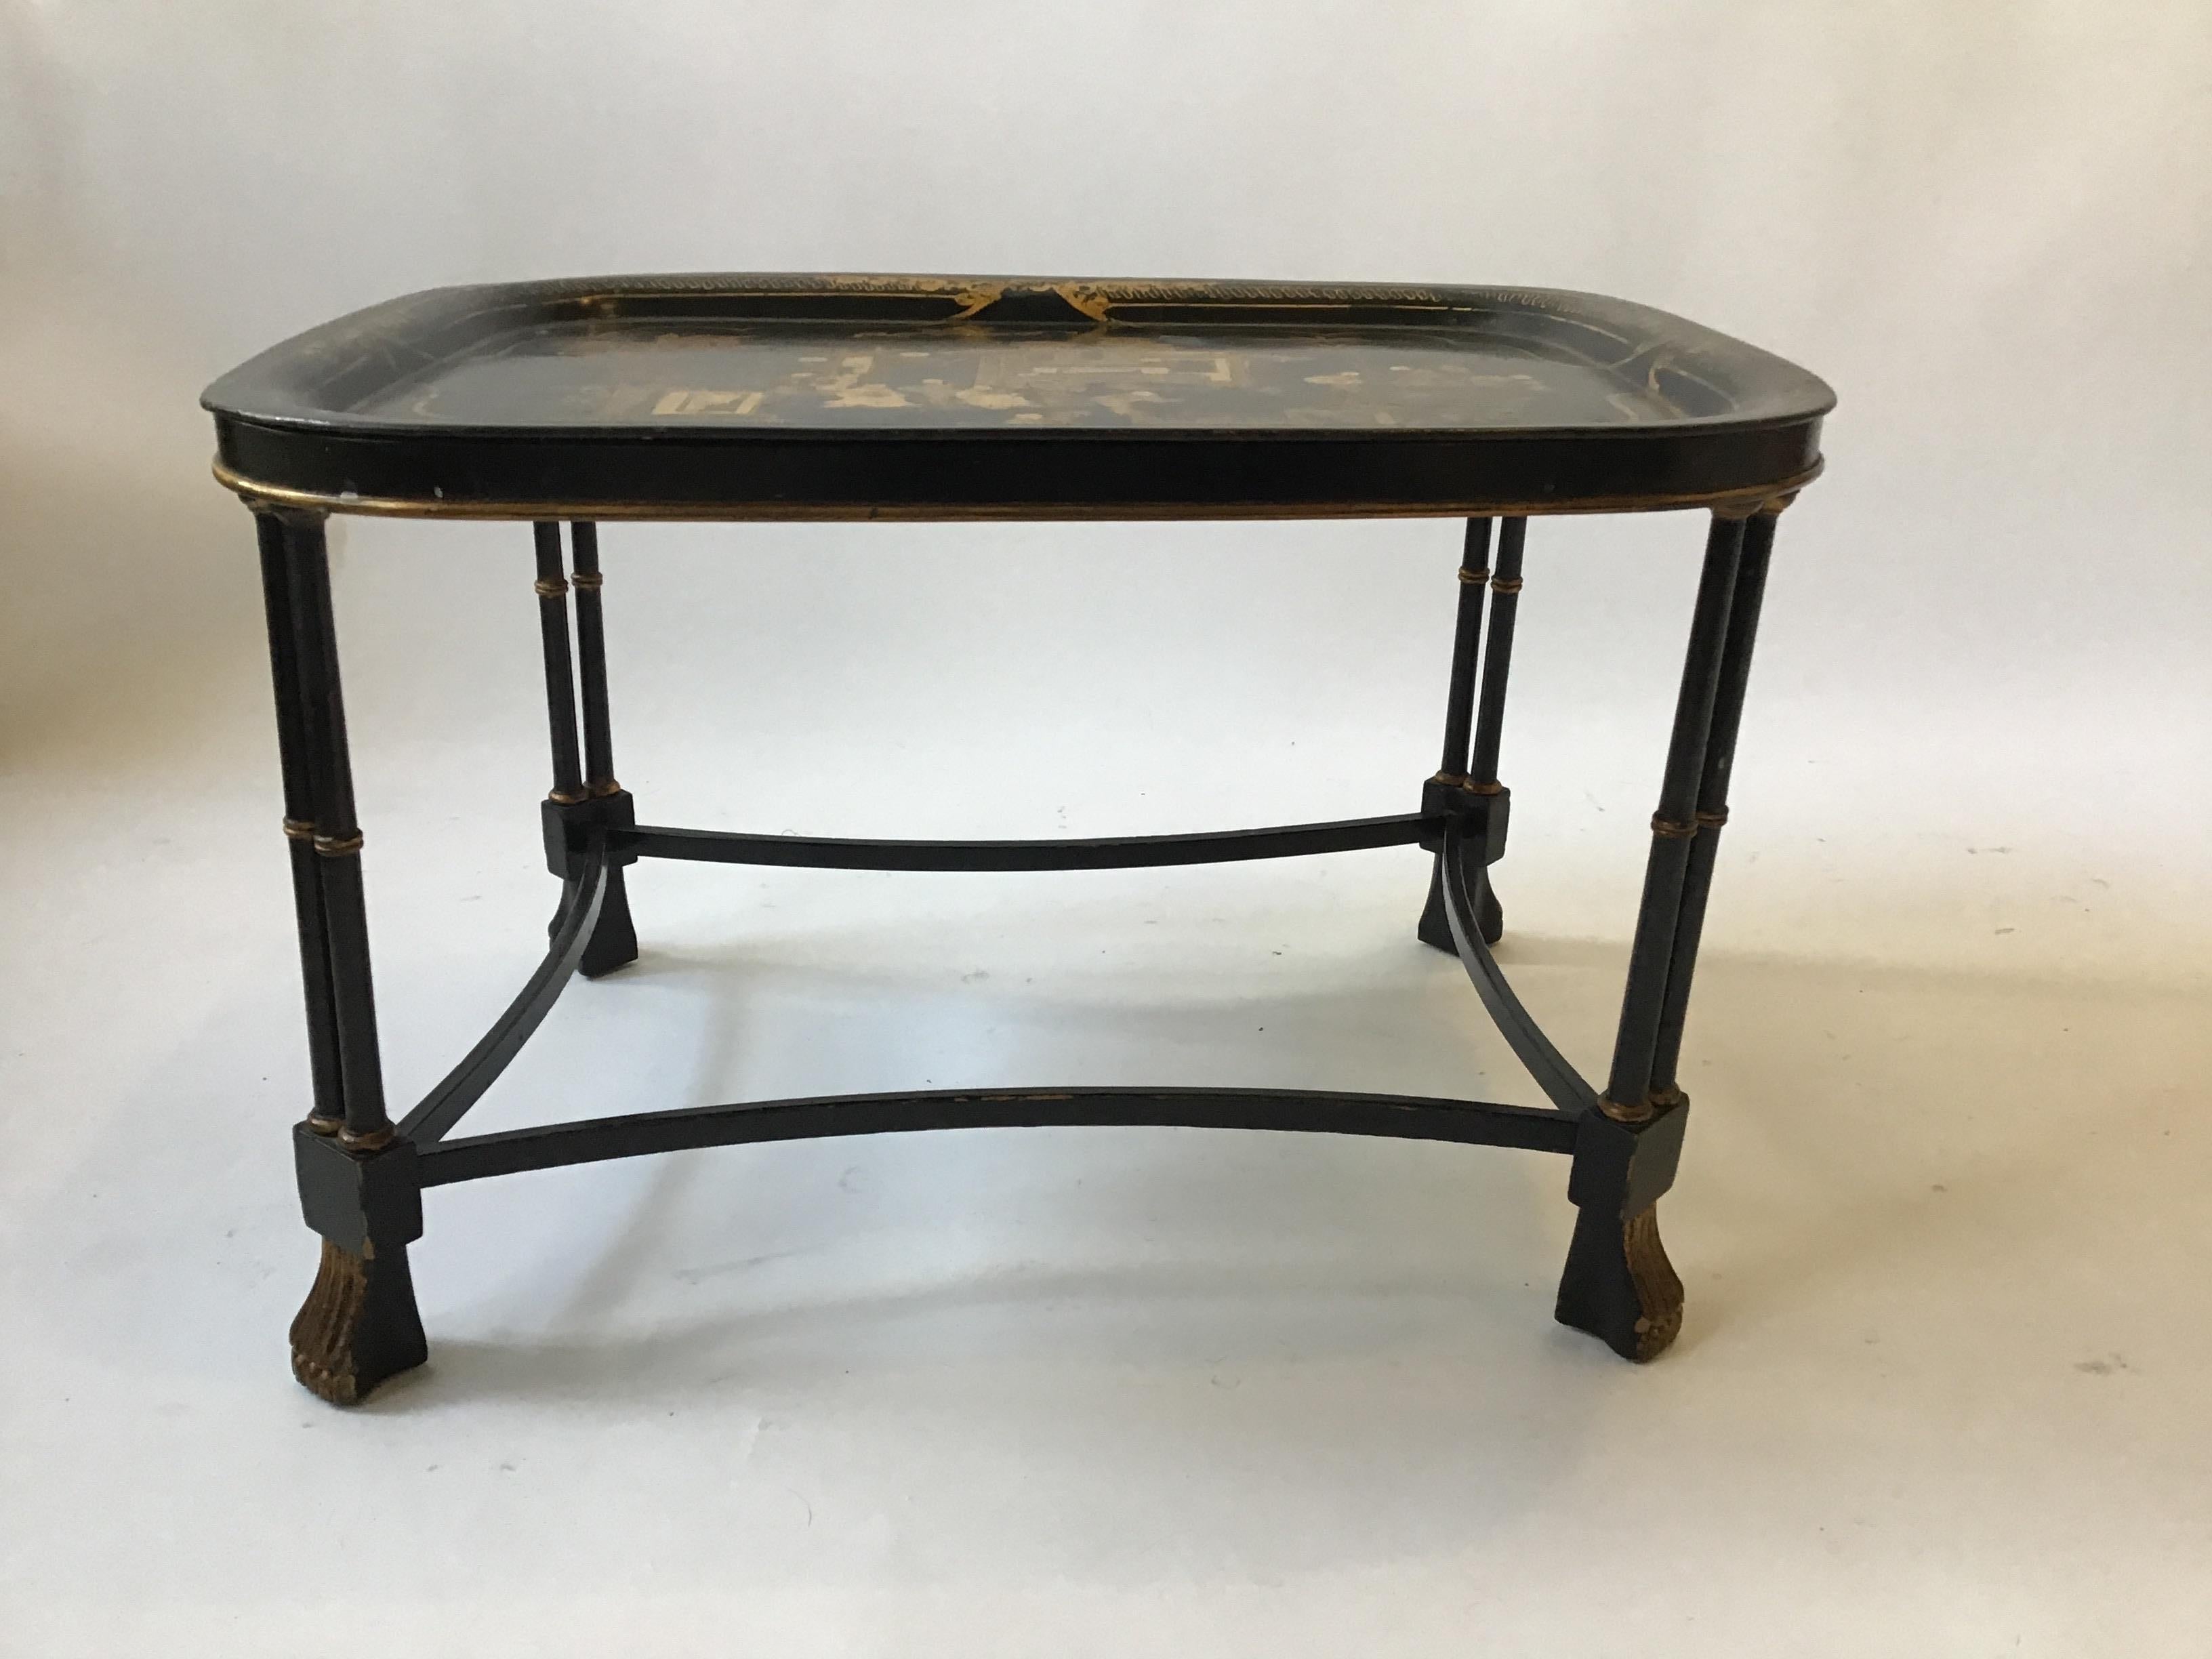 1920s English Tray Table With Asian Motif In Good Condition For Sale In Tarrytown, NY